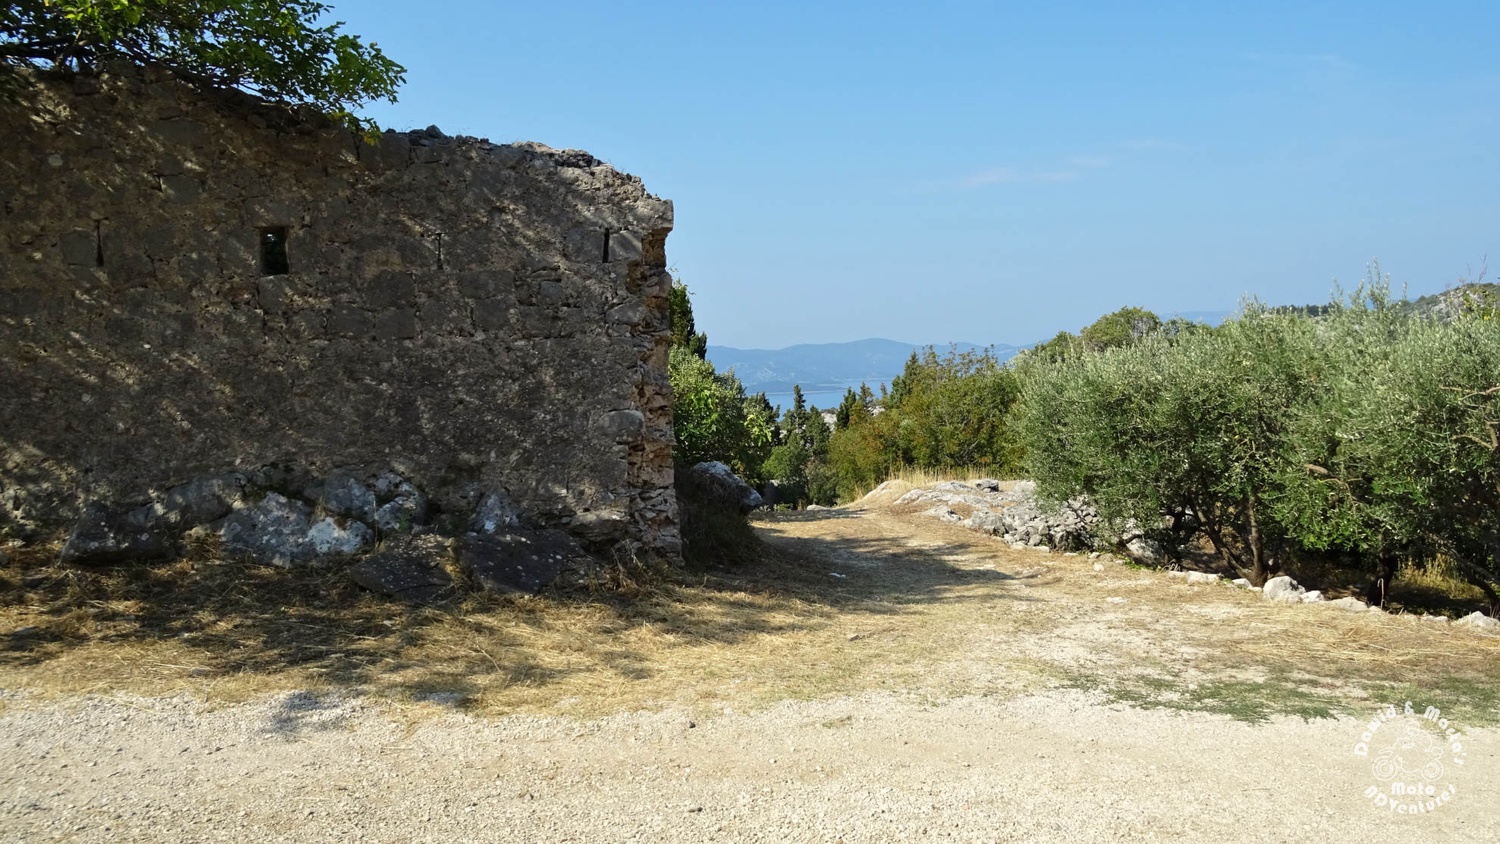 Entrance to the Smrden Grad fortress